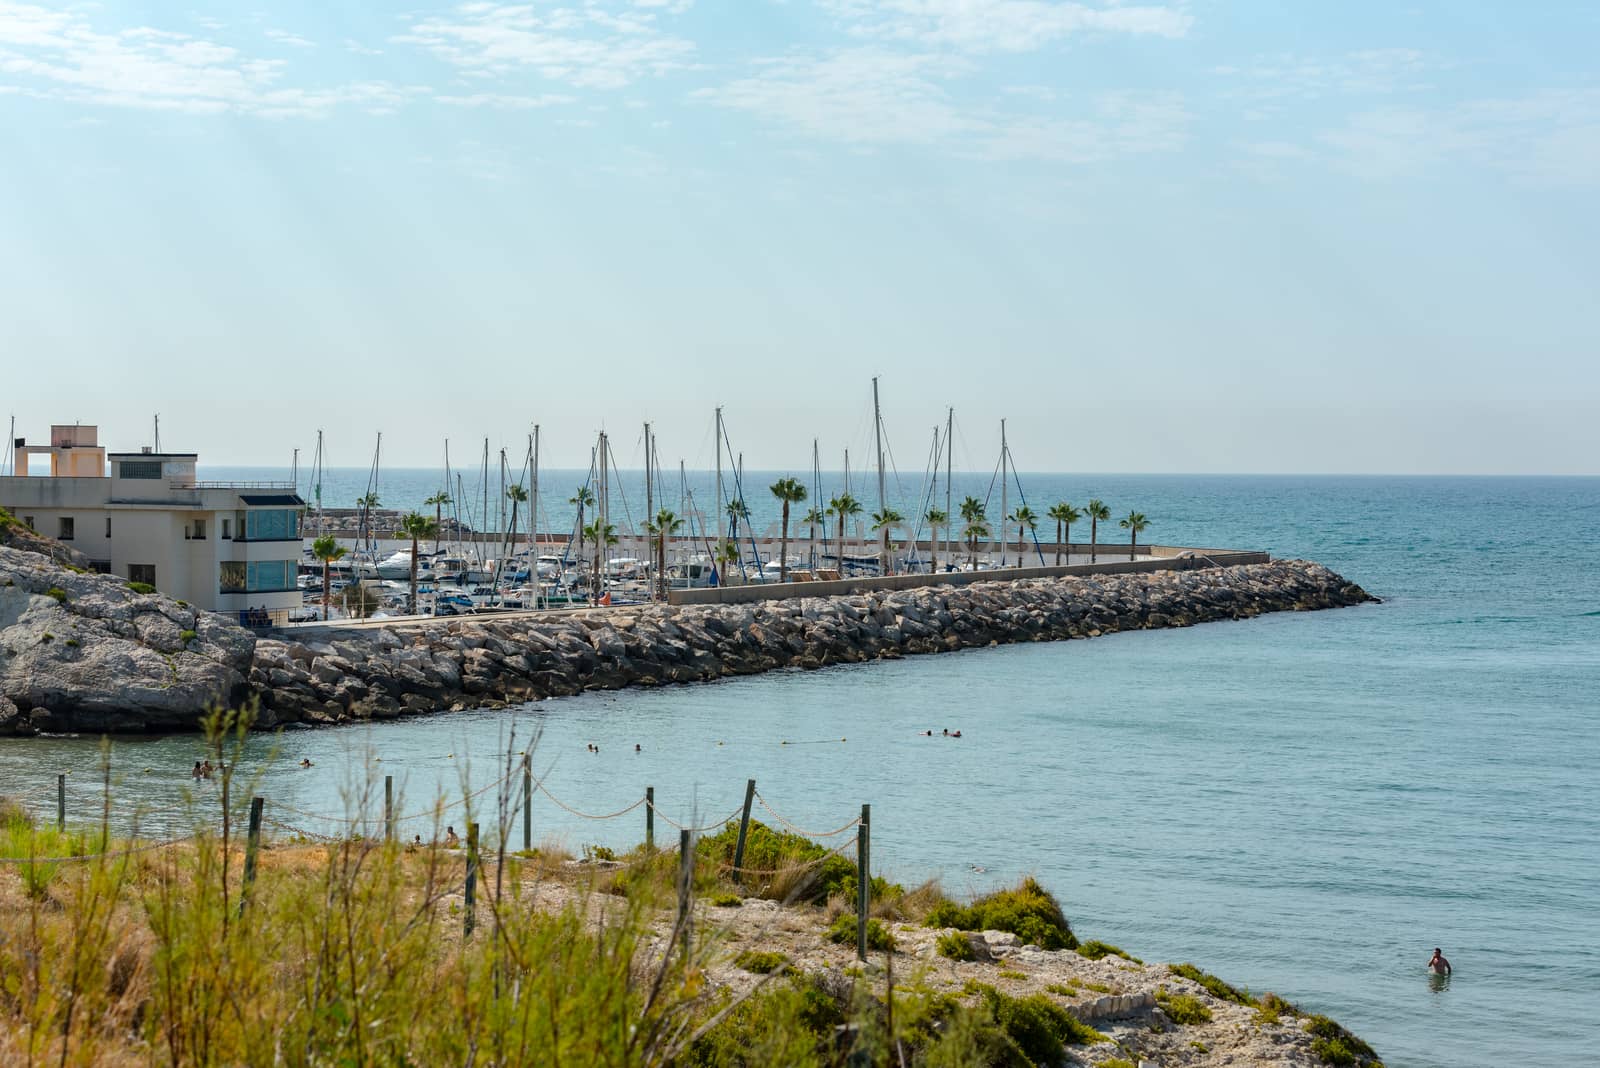 Sitges, Catalonia, Spain: July 28, 2020: Port of Sitges. People in the beach in Sitges in summer 2020.